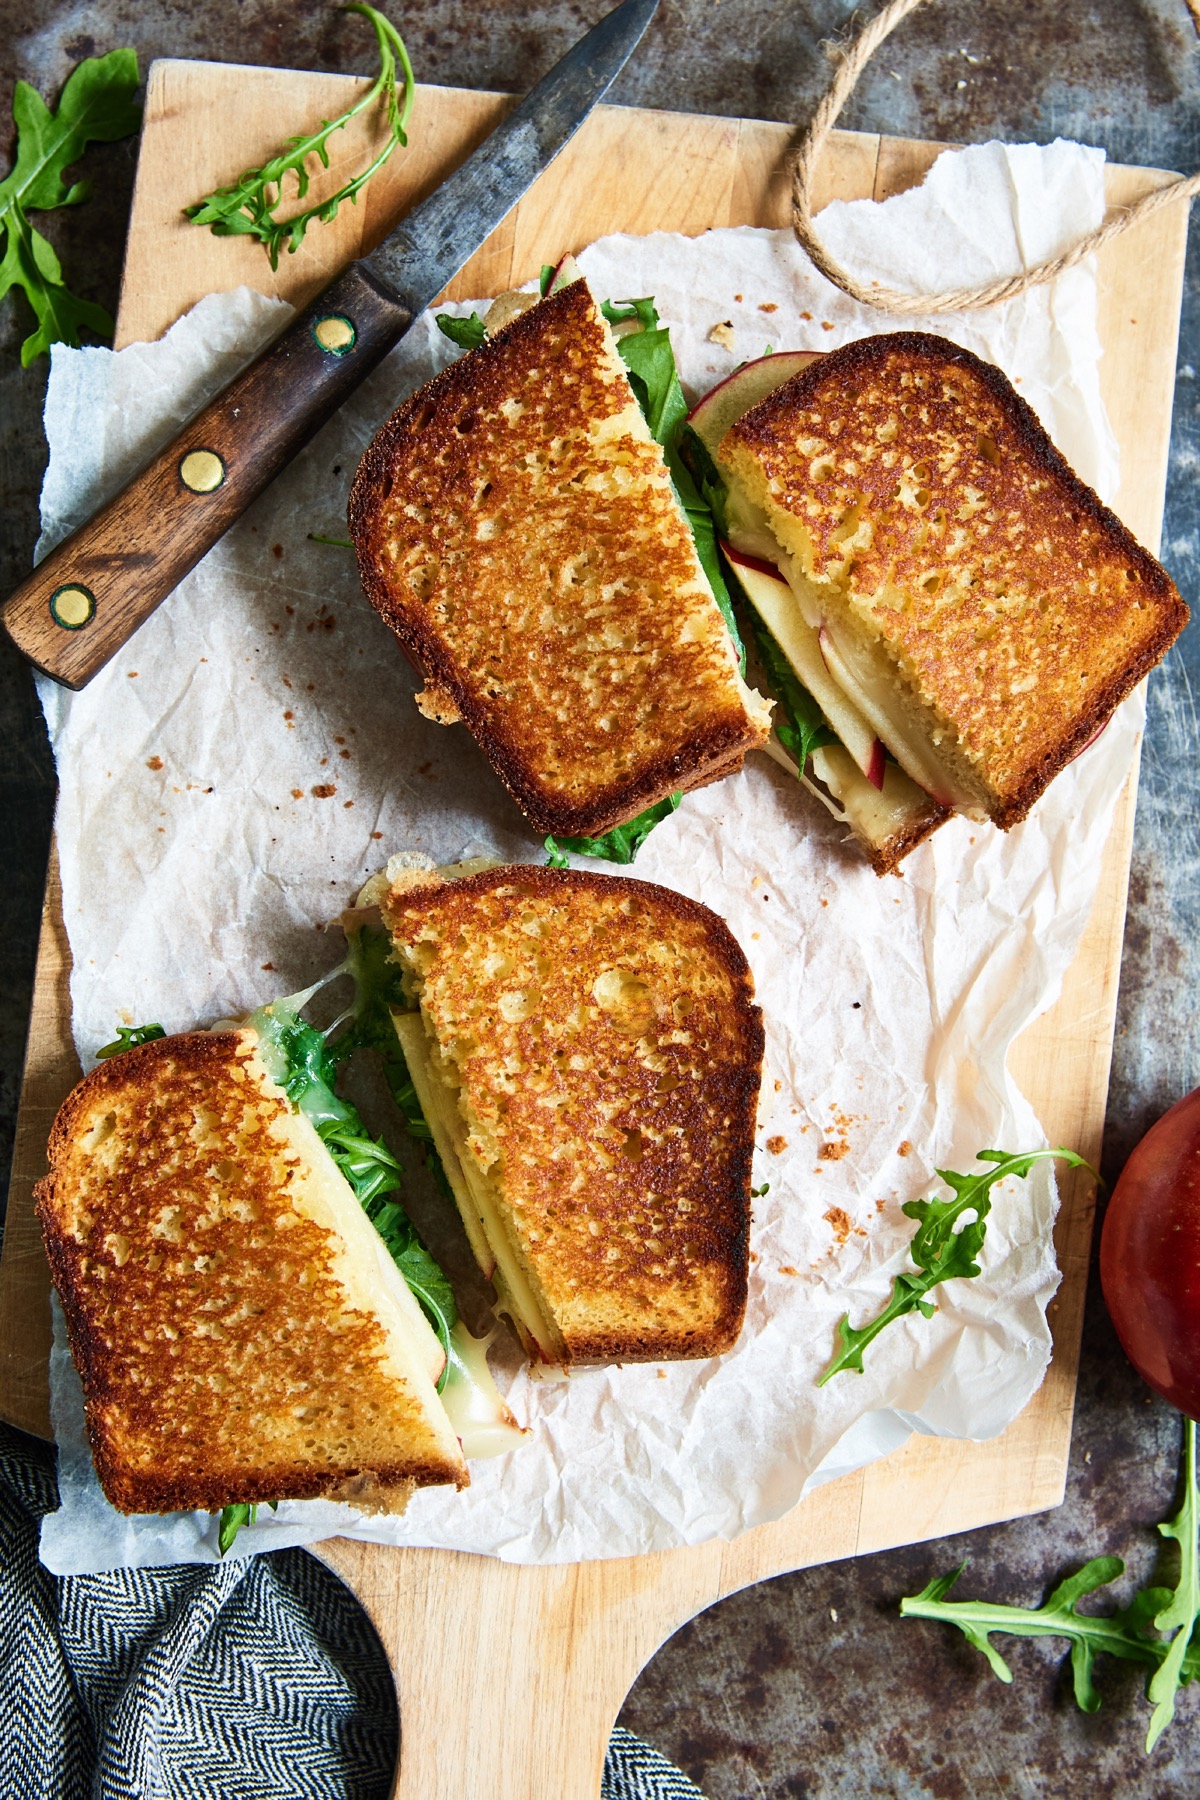 Apple, cheese and arugula sandwiches made on toasted Gluten-Free Toasting and Sandwich Bread.